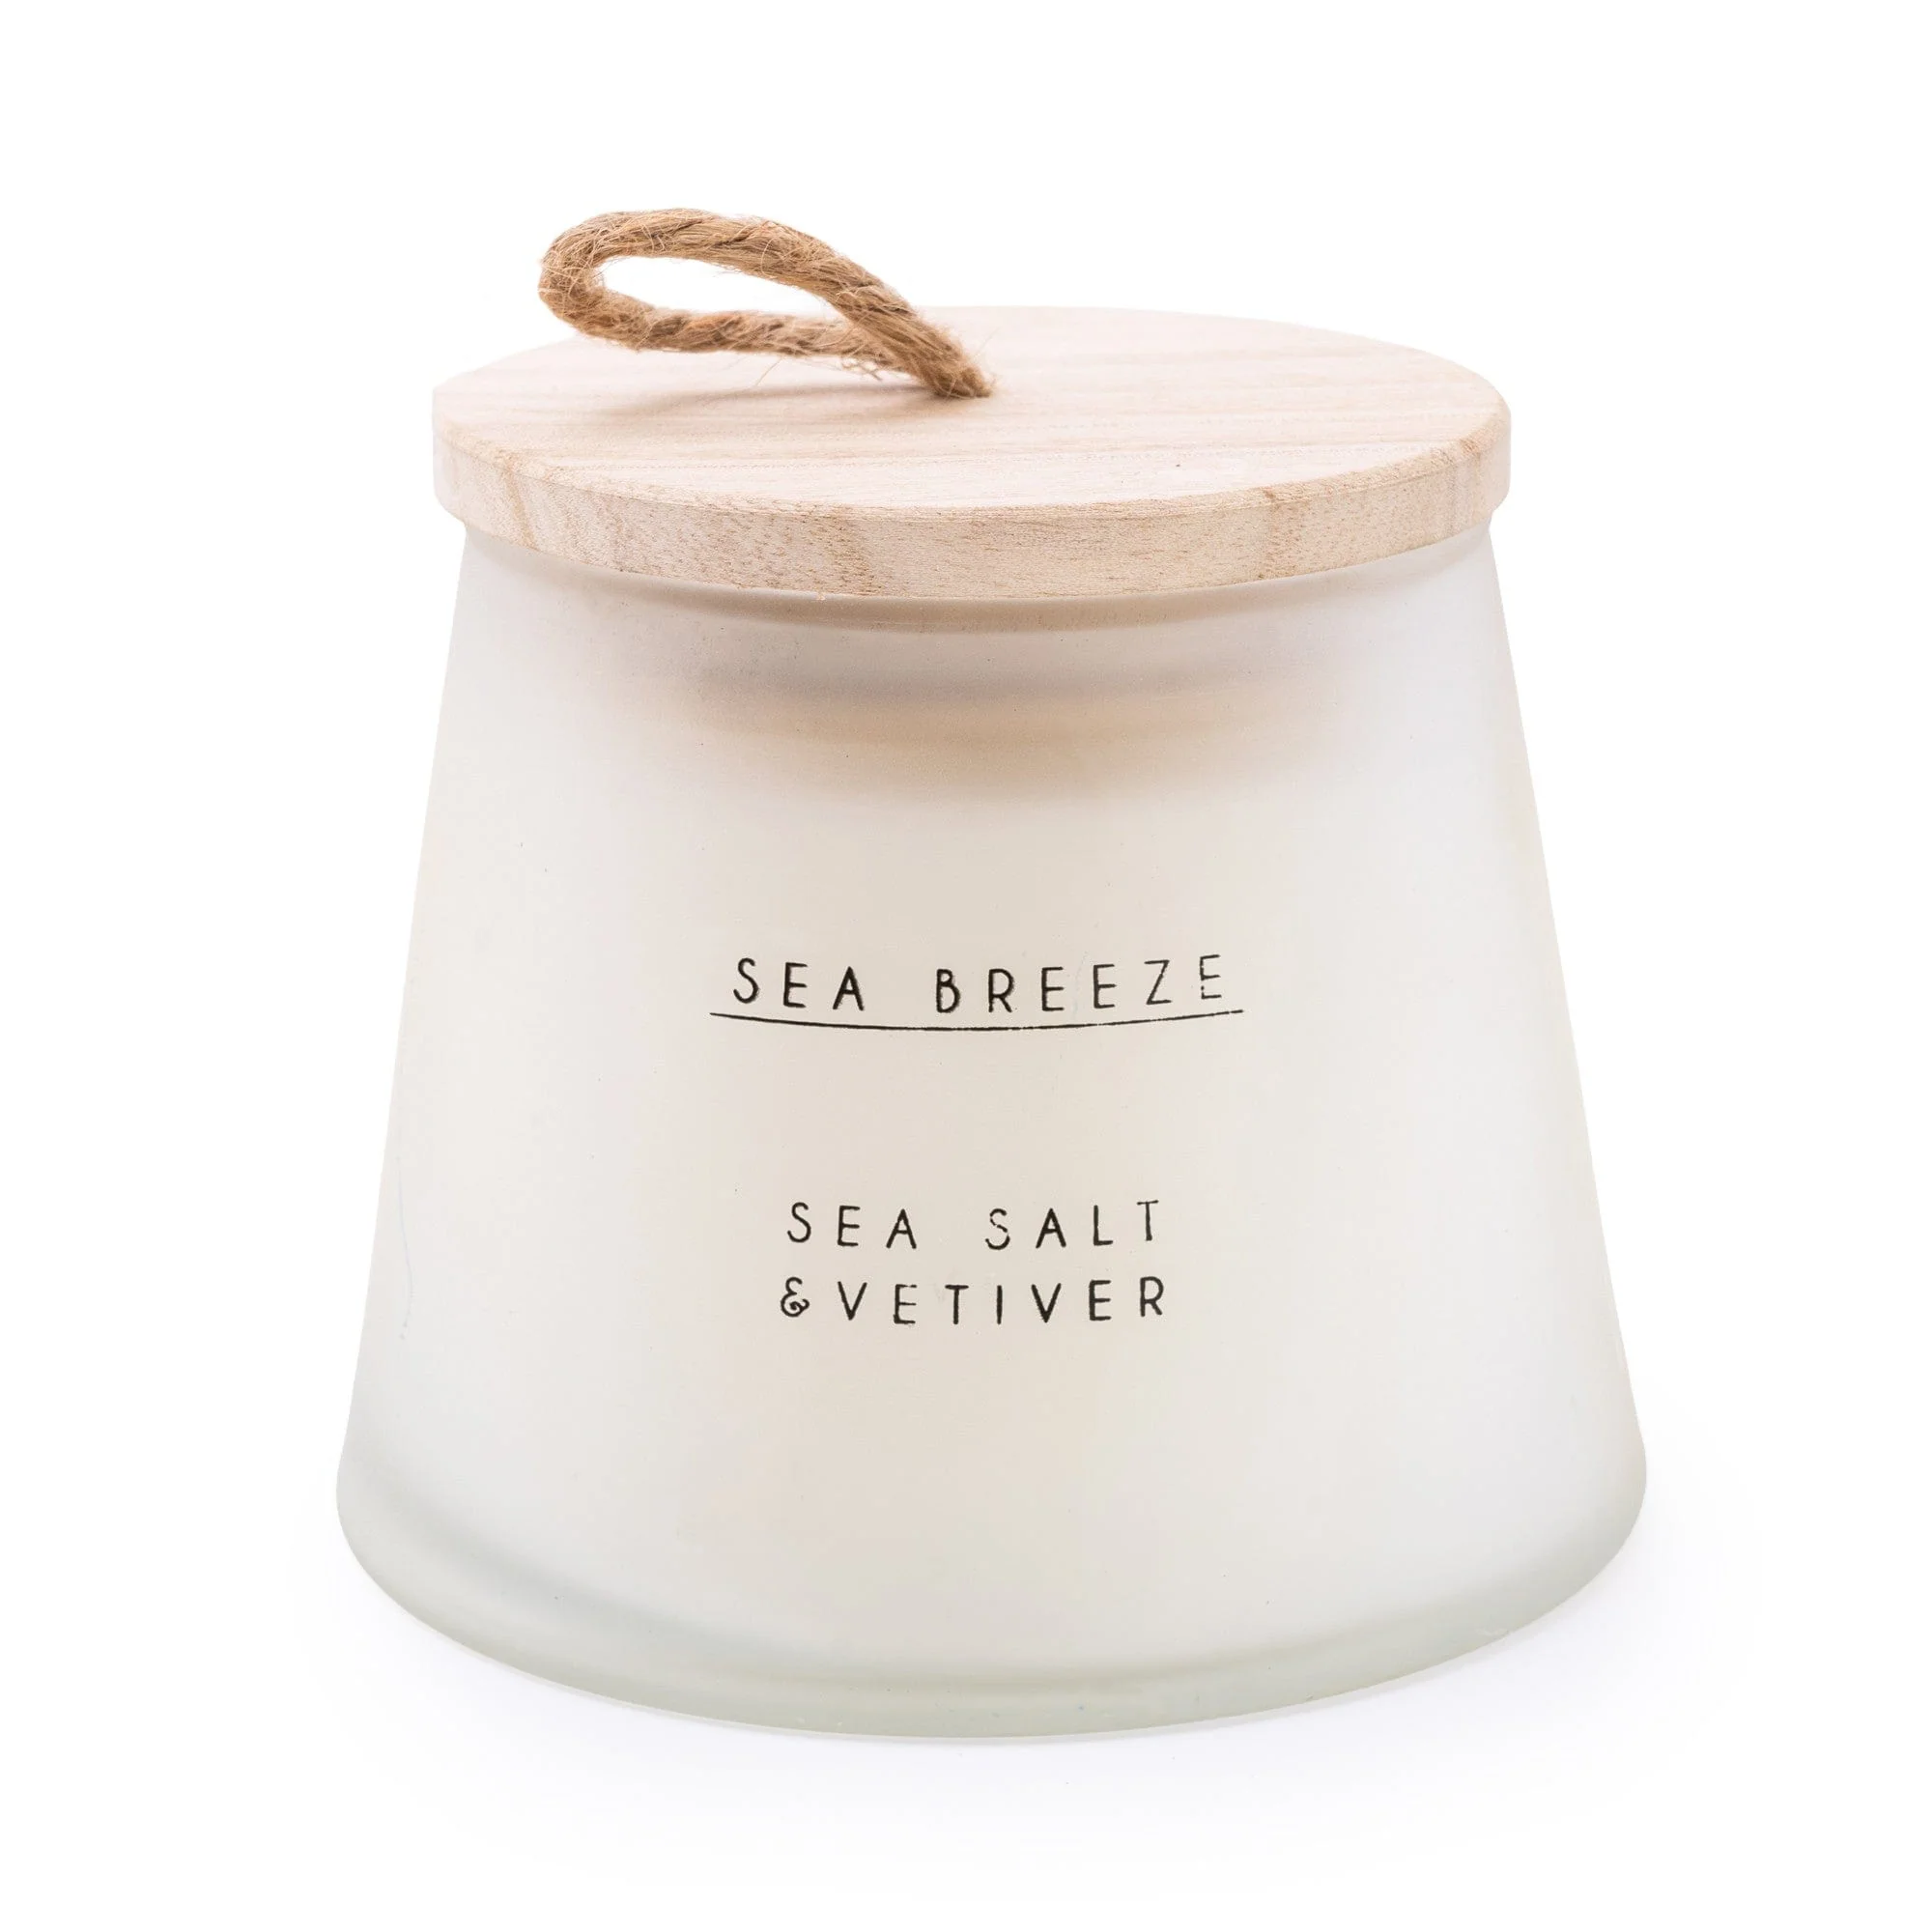 Large Wax Filled Frosted Glass Pot with Wooden Lid Candle - Sea Salt & Vetiver Scent